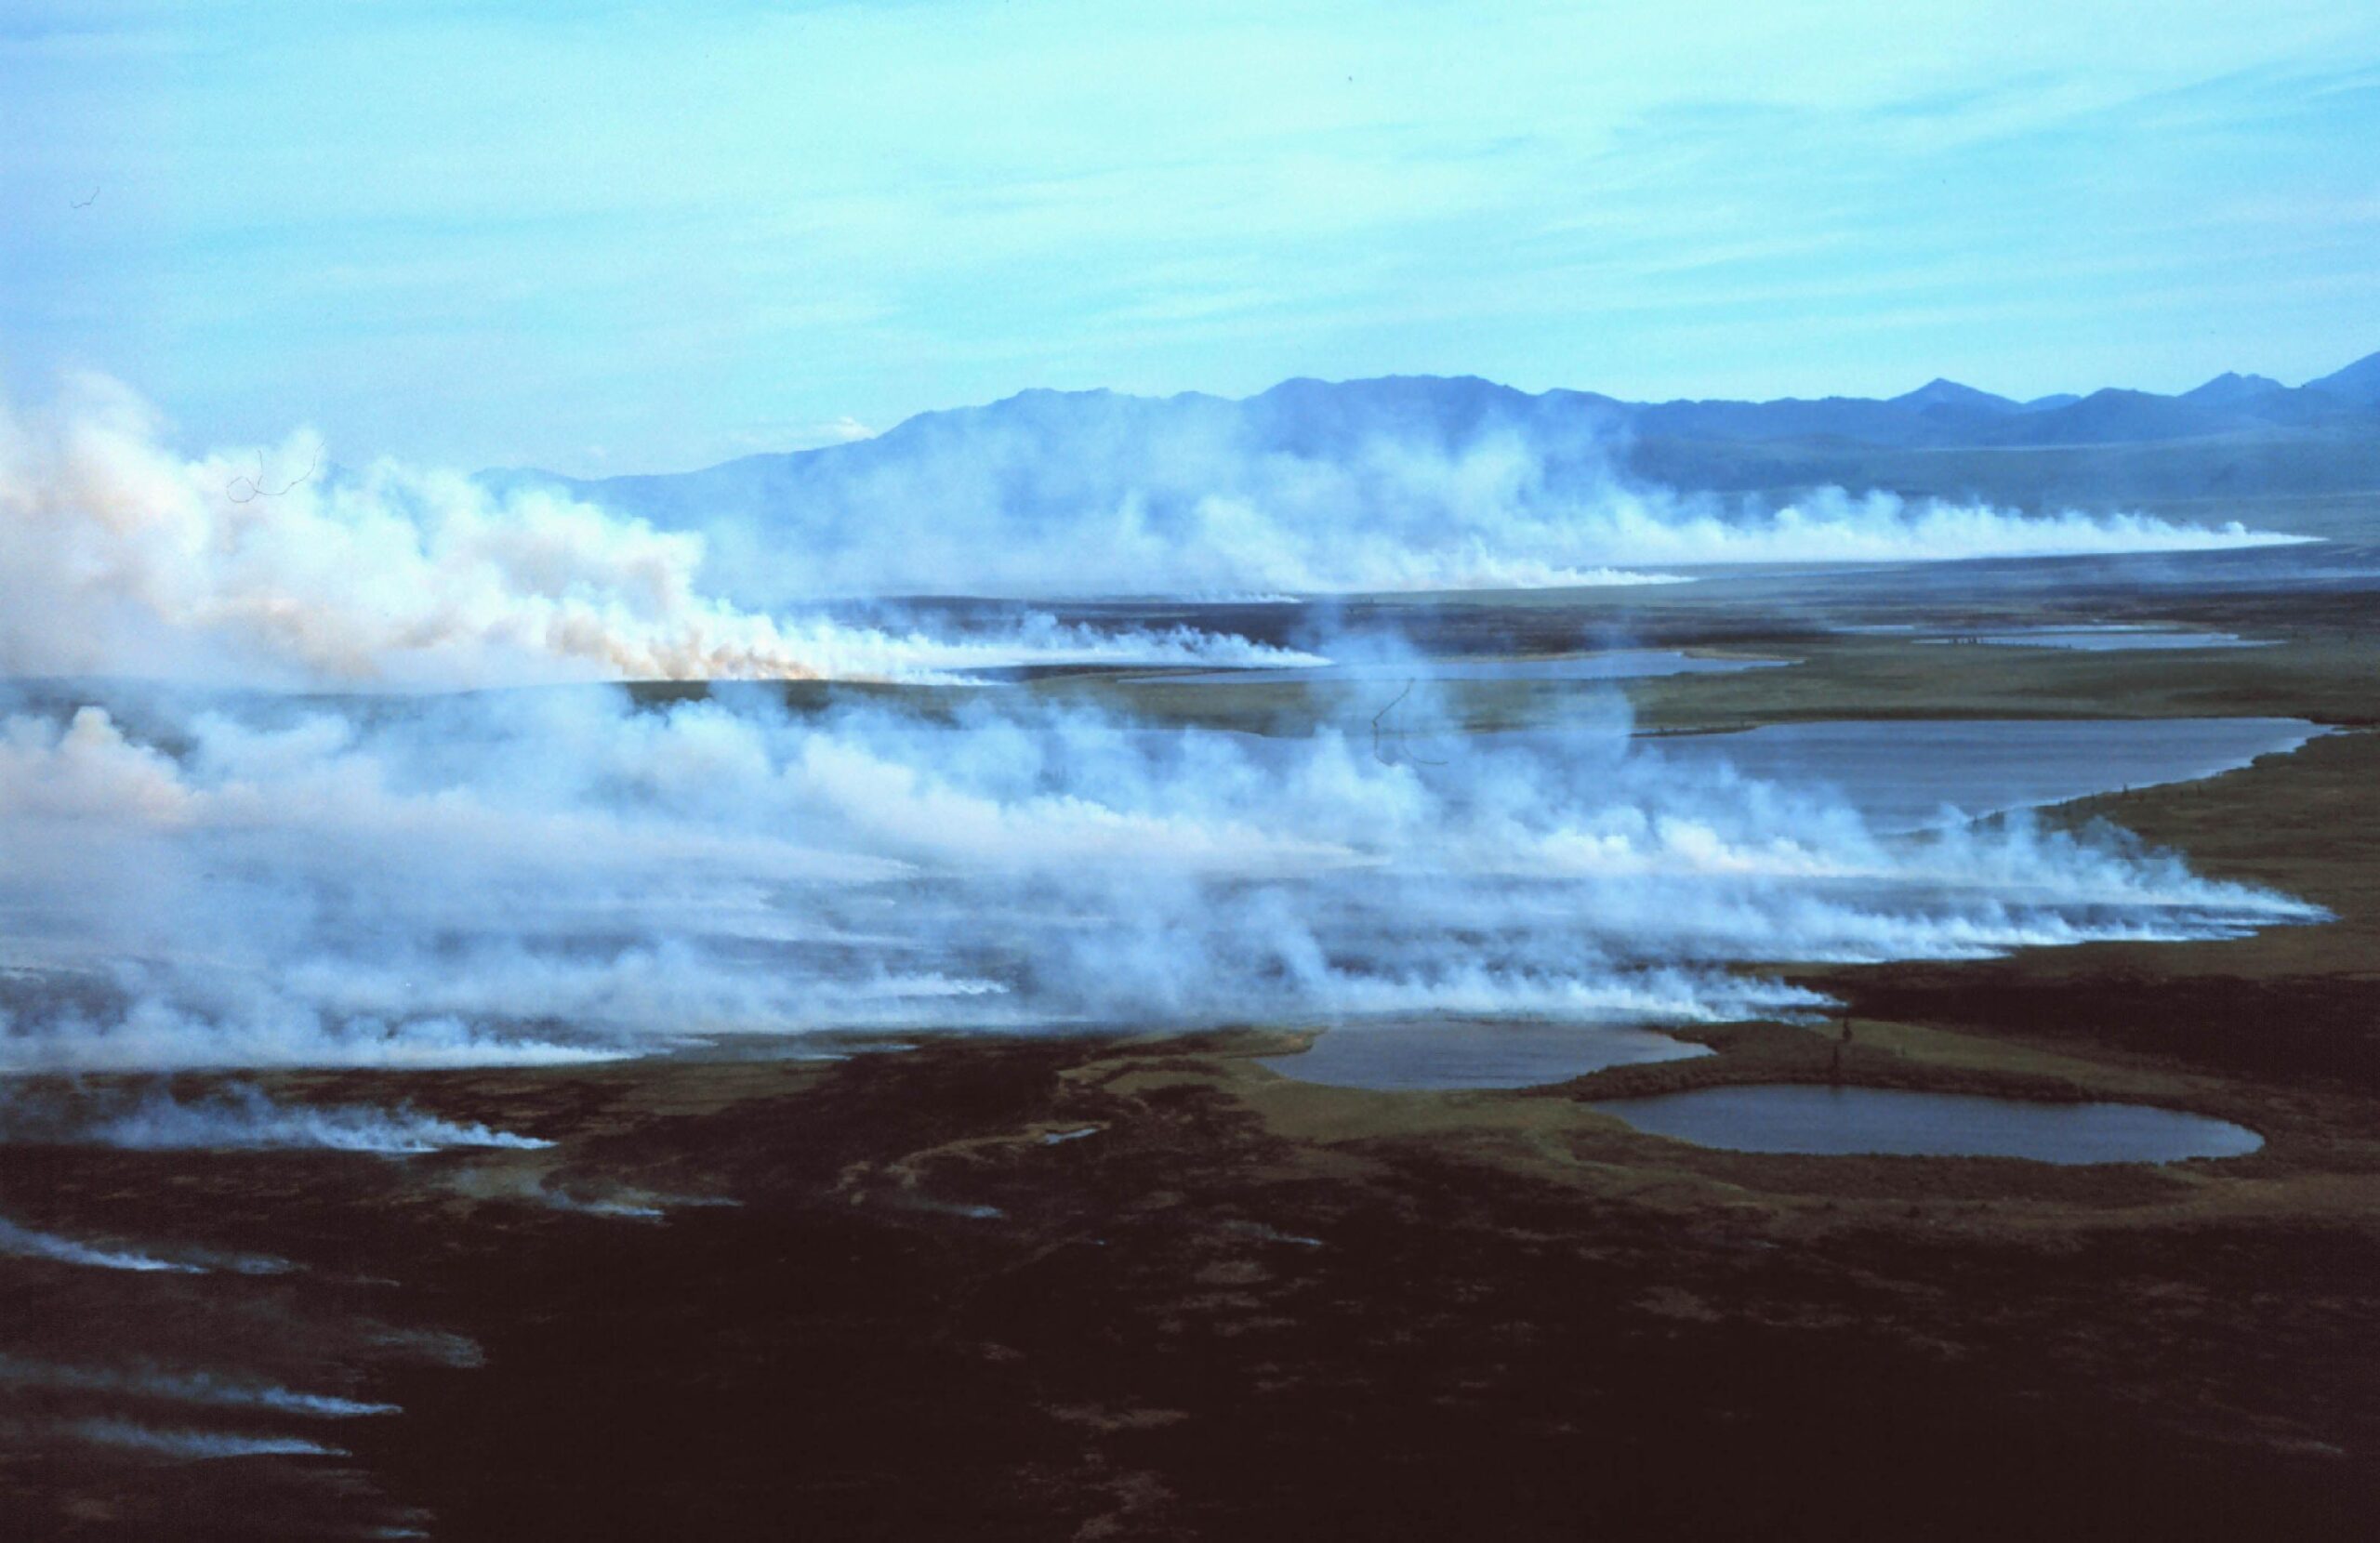 Where There’s Smoke There’s Fire: Influence of Arctic Tundra Fire on Methane Dynamics